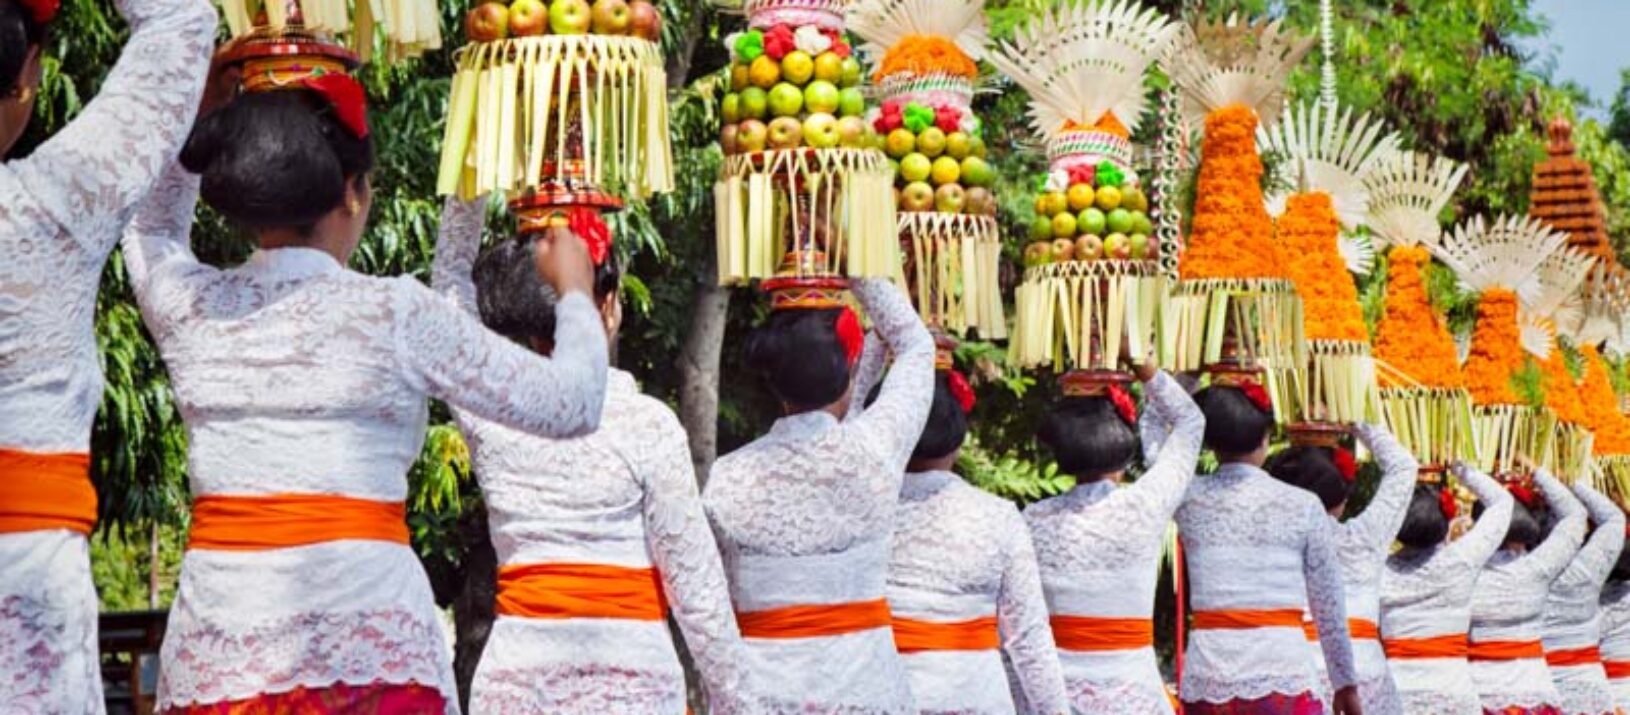 The Balinese New Year – Nyepi Day